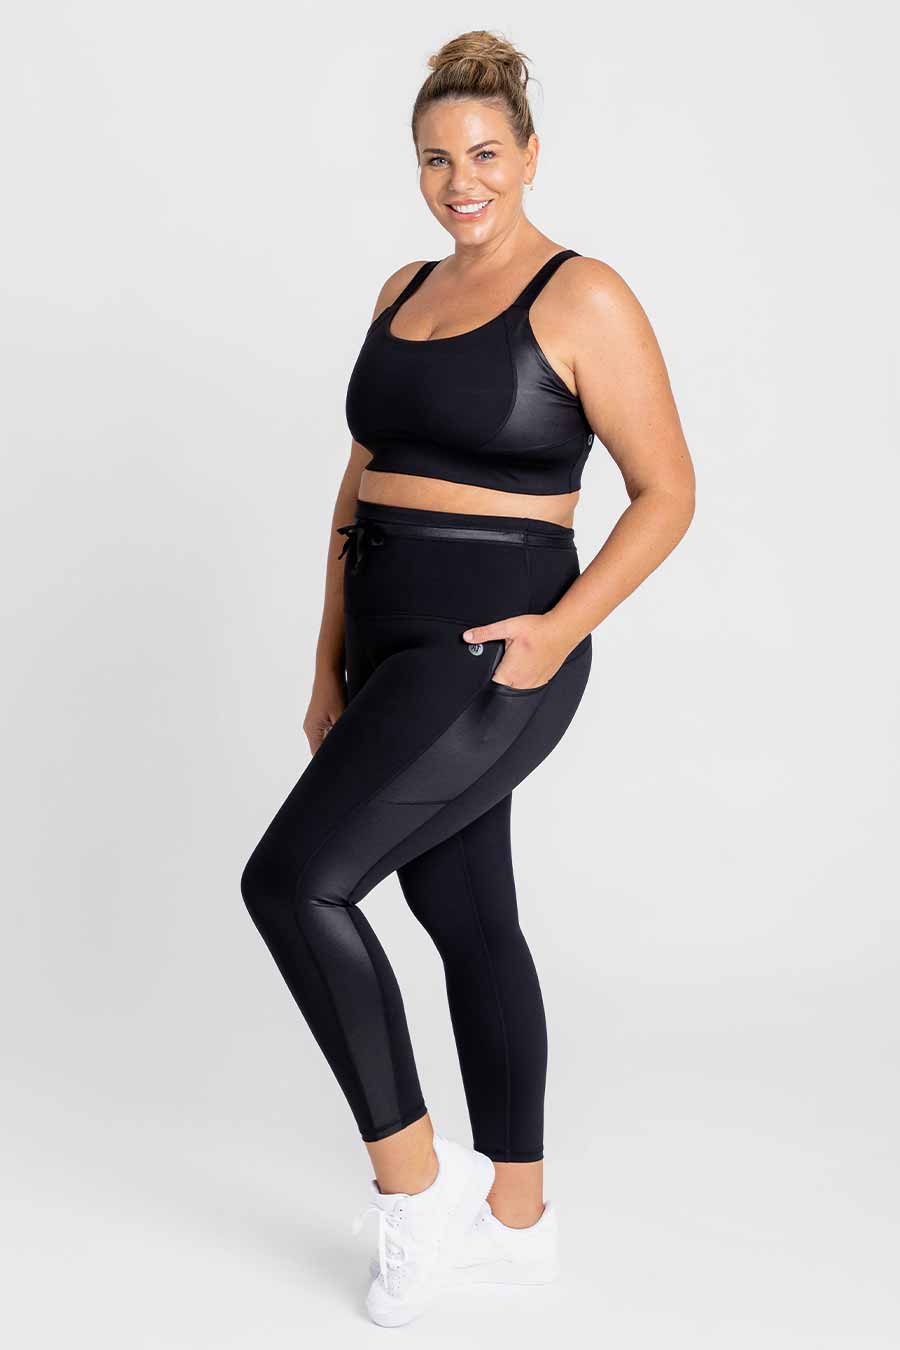 Active Drawstring 7/8 Length Legging - Shiny Black from Active Truth™
